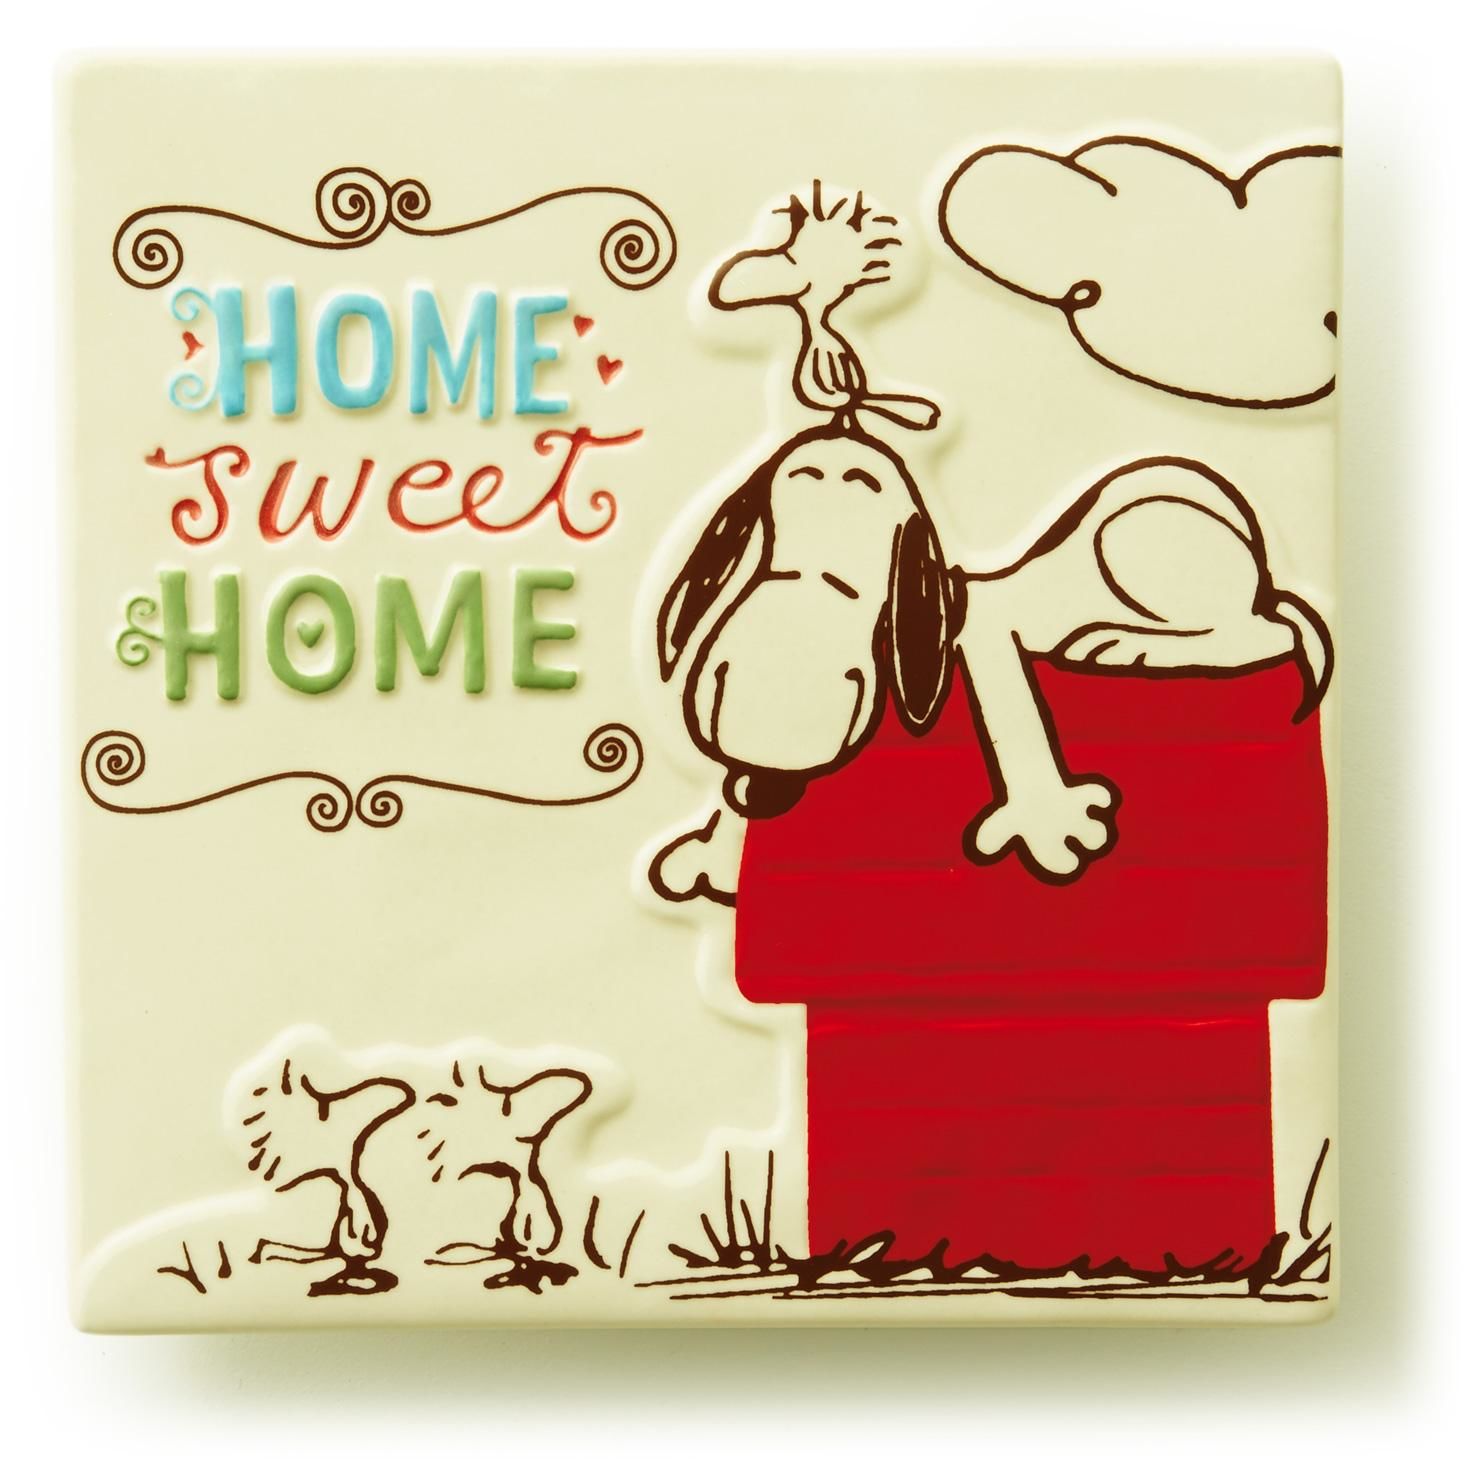 Home Sweet Home Ceramic Tile - Plaques & Signs - Hallmark